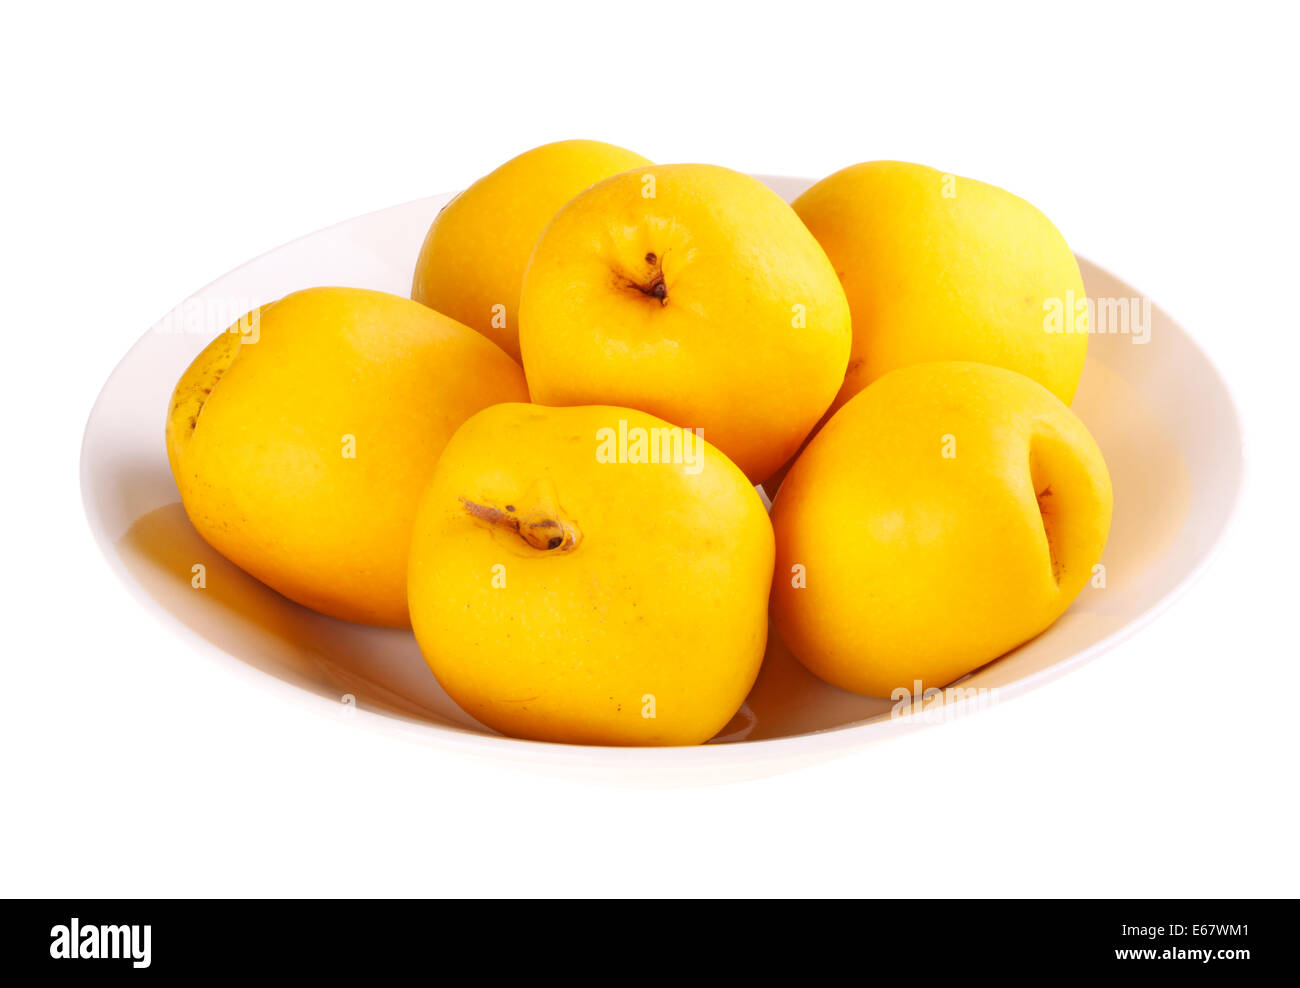 Bowl of yellow, ripe fruit of the flowering or Japanese quince (Chaenomeles hybrids) isolated against a white background Stock Photo